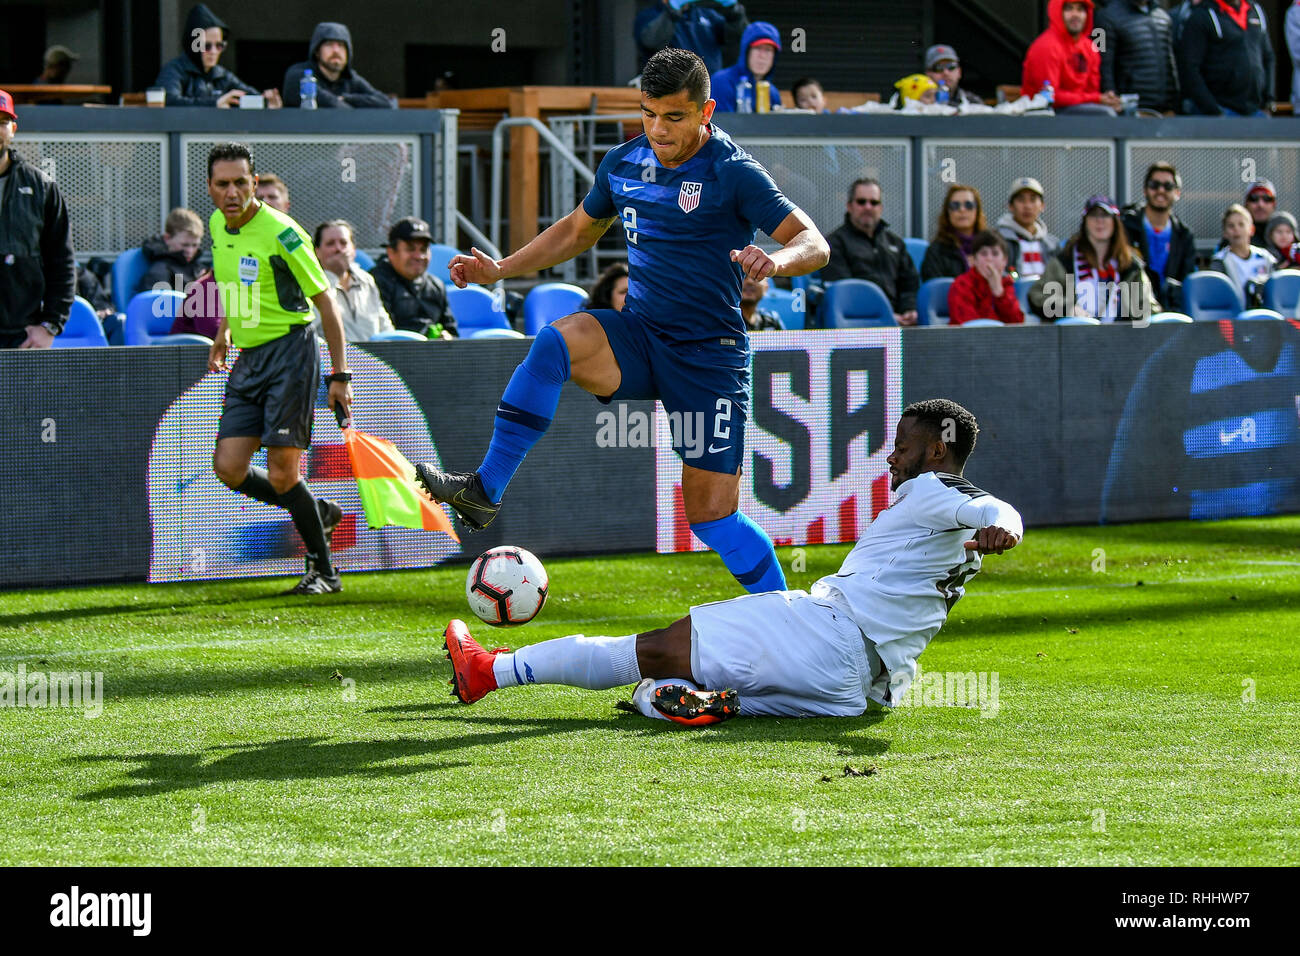 San Jose, California, USA. 2nd Feb, 2019. Costa Rica defender Waylon Francis (12) slides in to knock a ball away from Unites States defender Nick Lima (2) during the international friendly soccer match between Costa Rica and the United States at Avaya Stadium in San Jose, California. Chris Brown/CSM/Alamy Live News Stock Photo